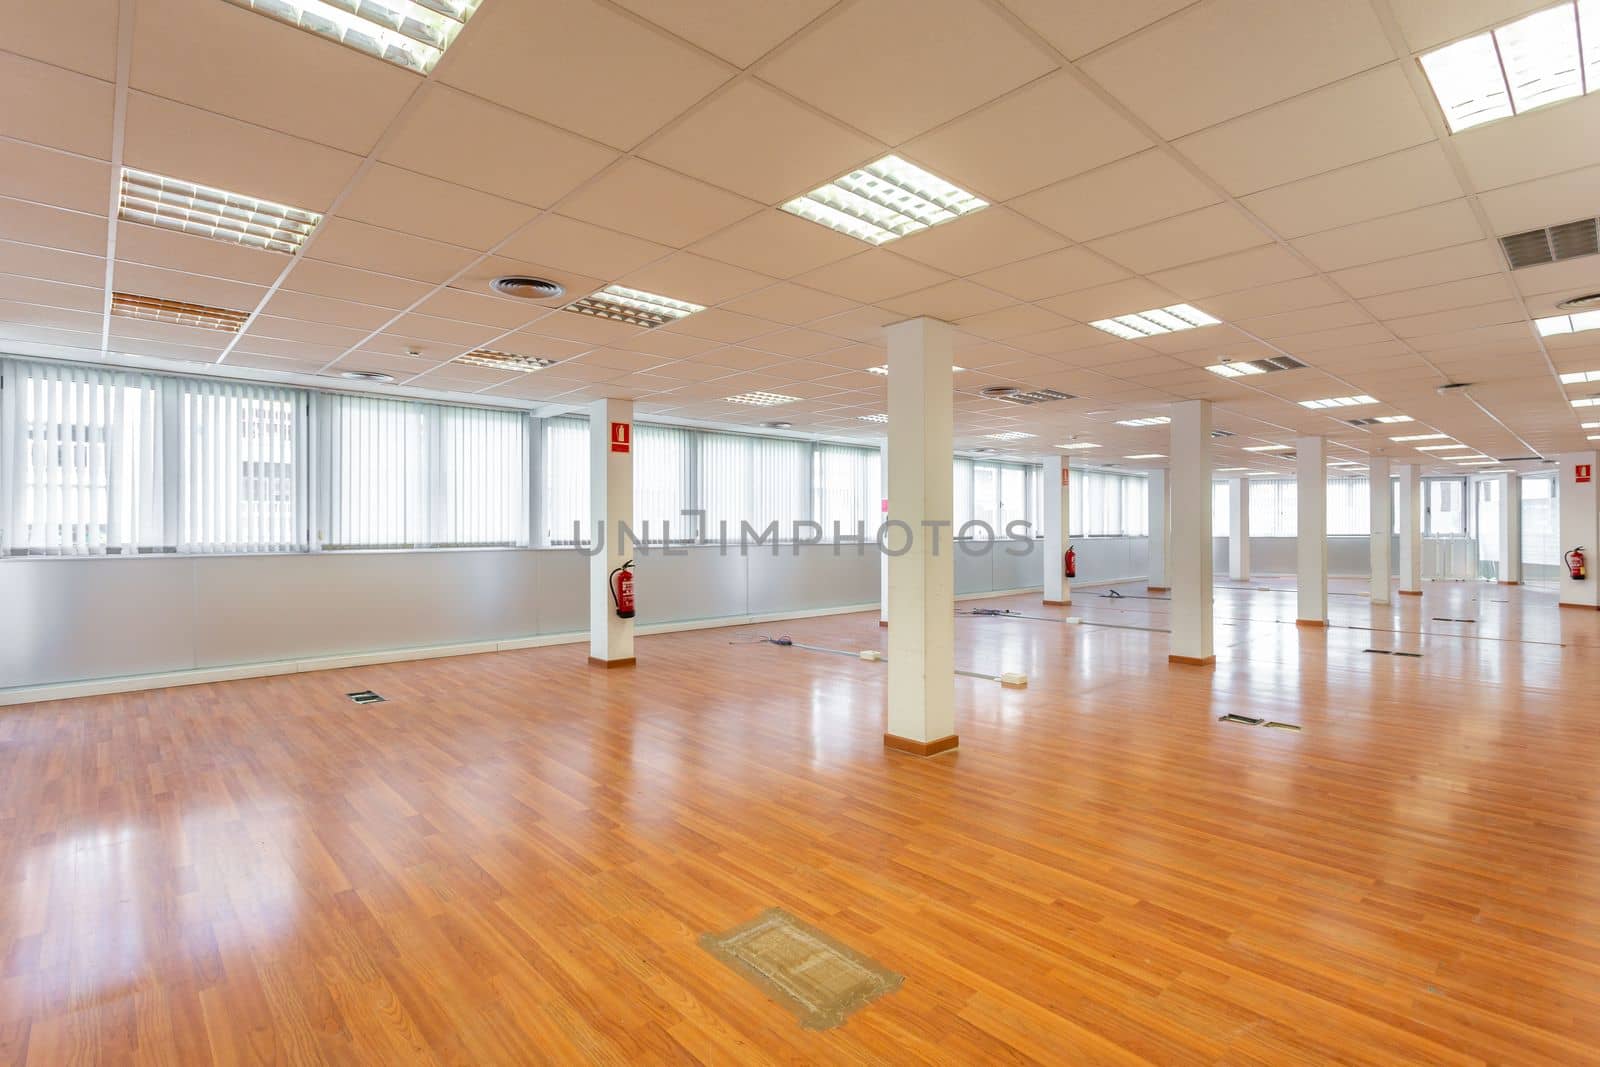 Large empty space with ceiling tiles, fluorescent lights, light brown laminate flooring and white painted columns. Large office space left from a company